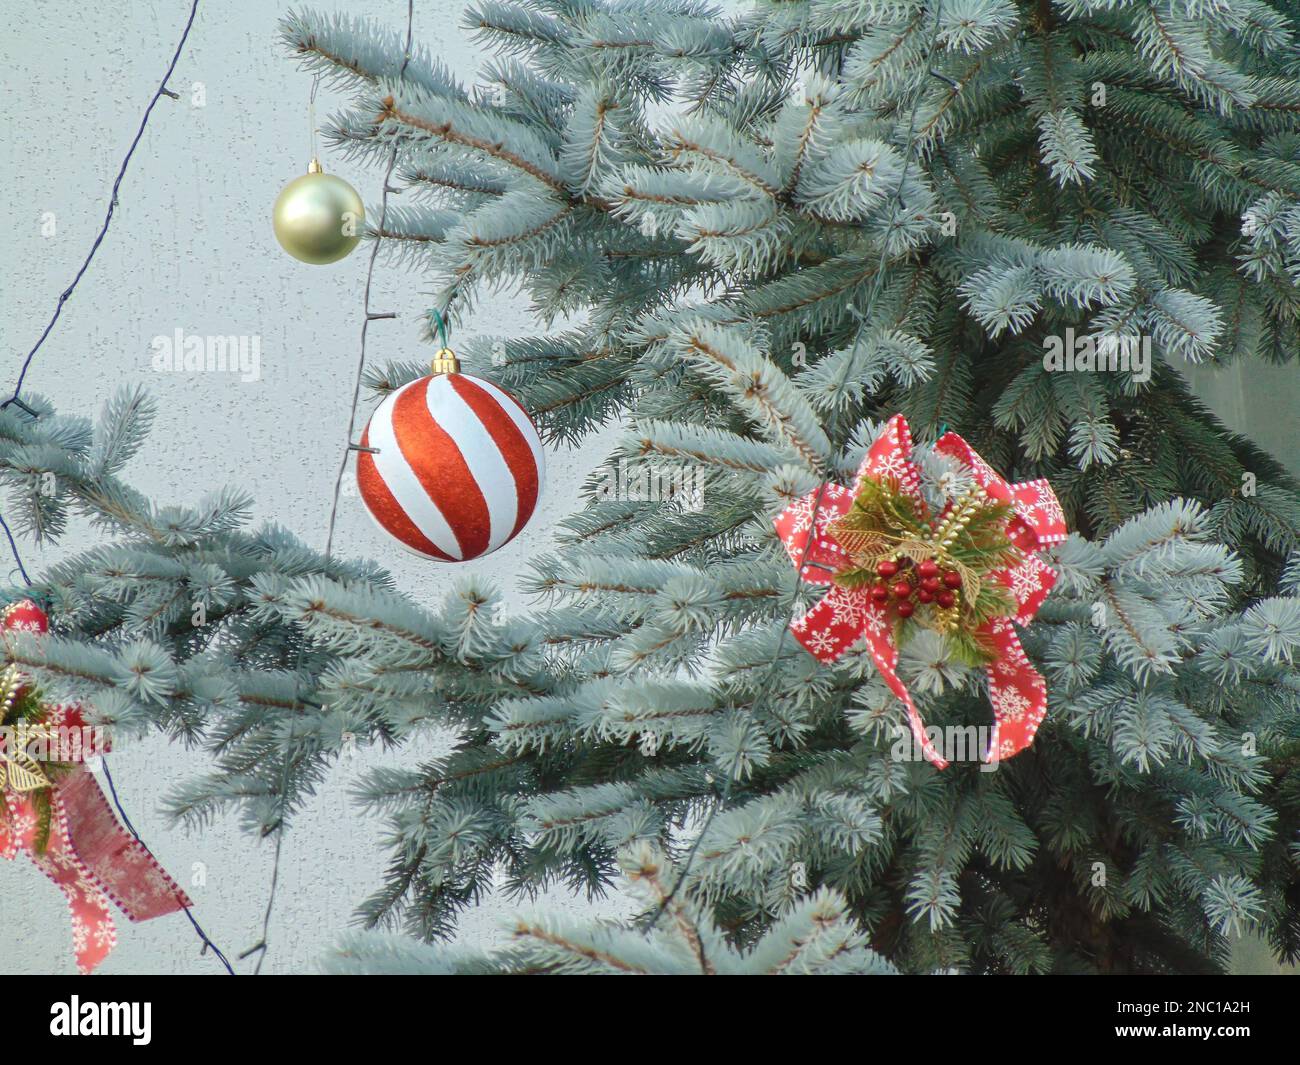 Colorado Blue Spruce tree decorated with globes and Christmas decorations Stock Photo